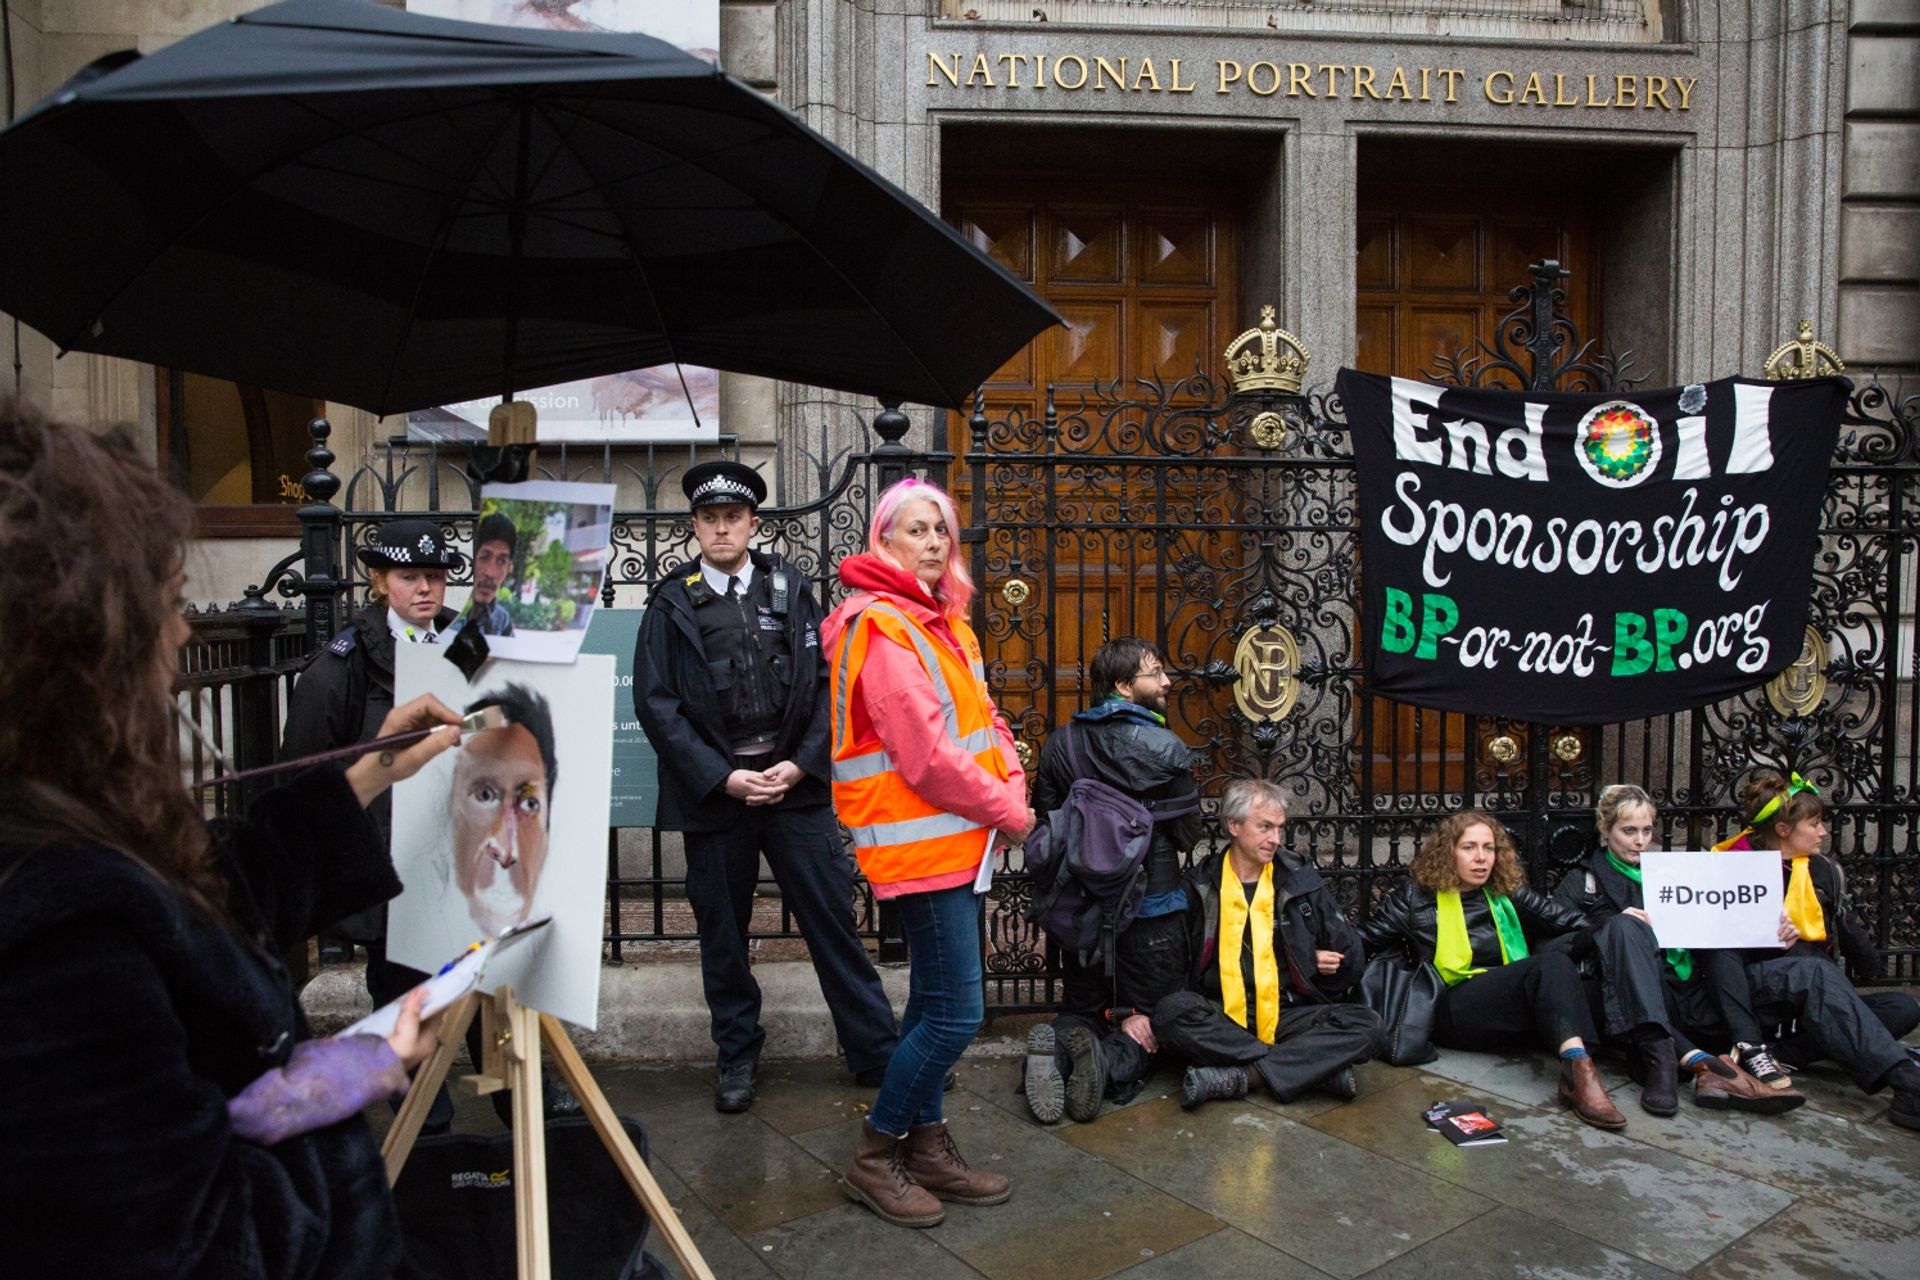 In 2019, members of the activist group BP or not BP? attached themselves to the gates at the main entrance of the National Portrait Gallery in protest of BP sponsorship Photo: Mark Kerrison